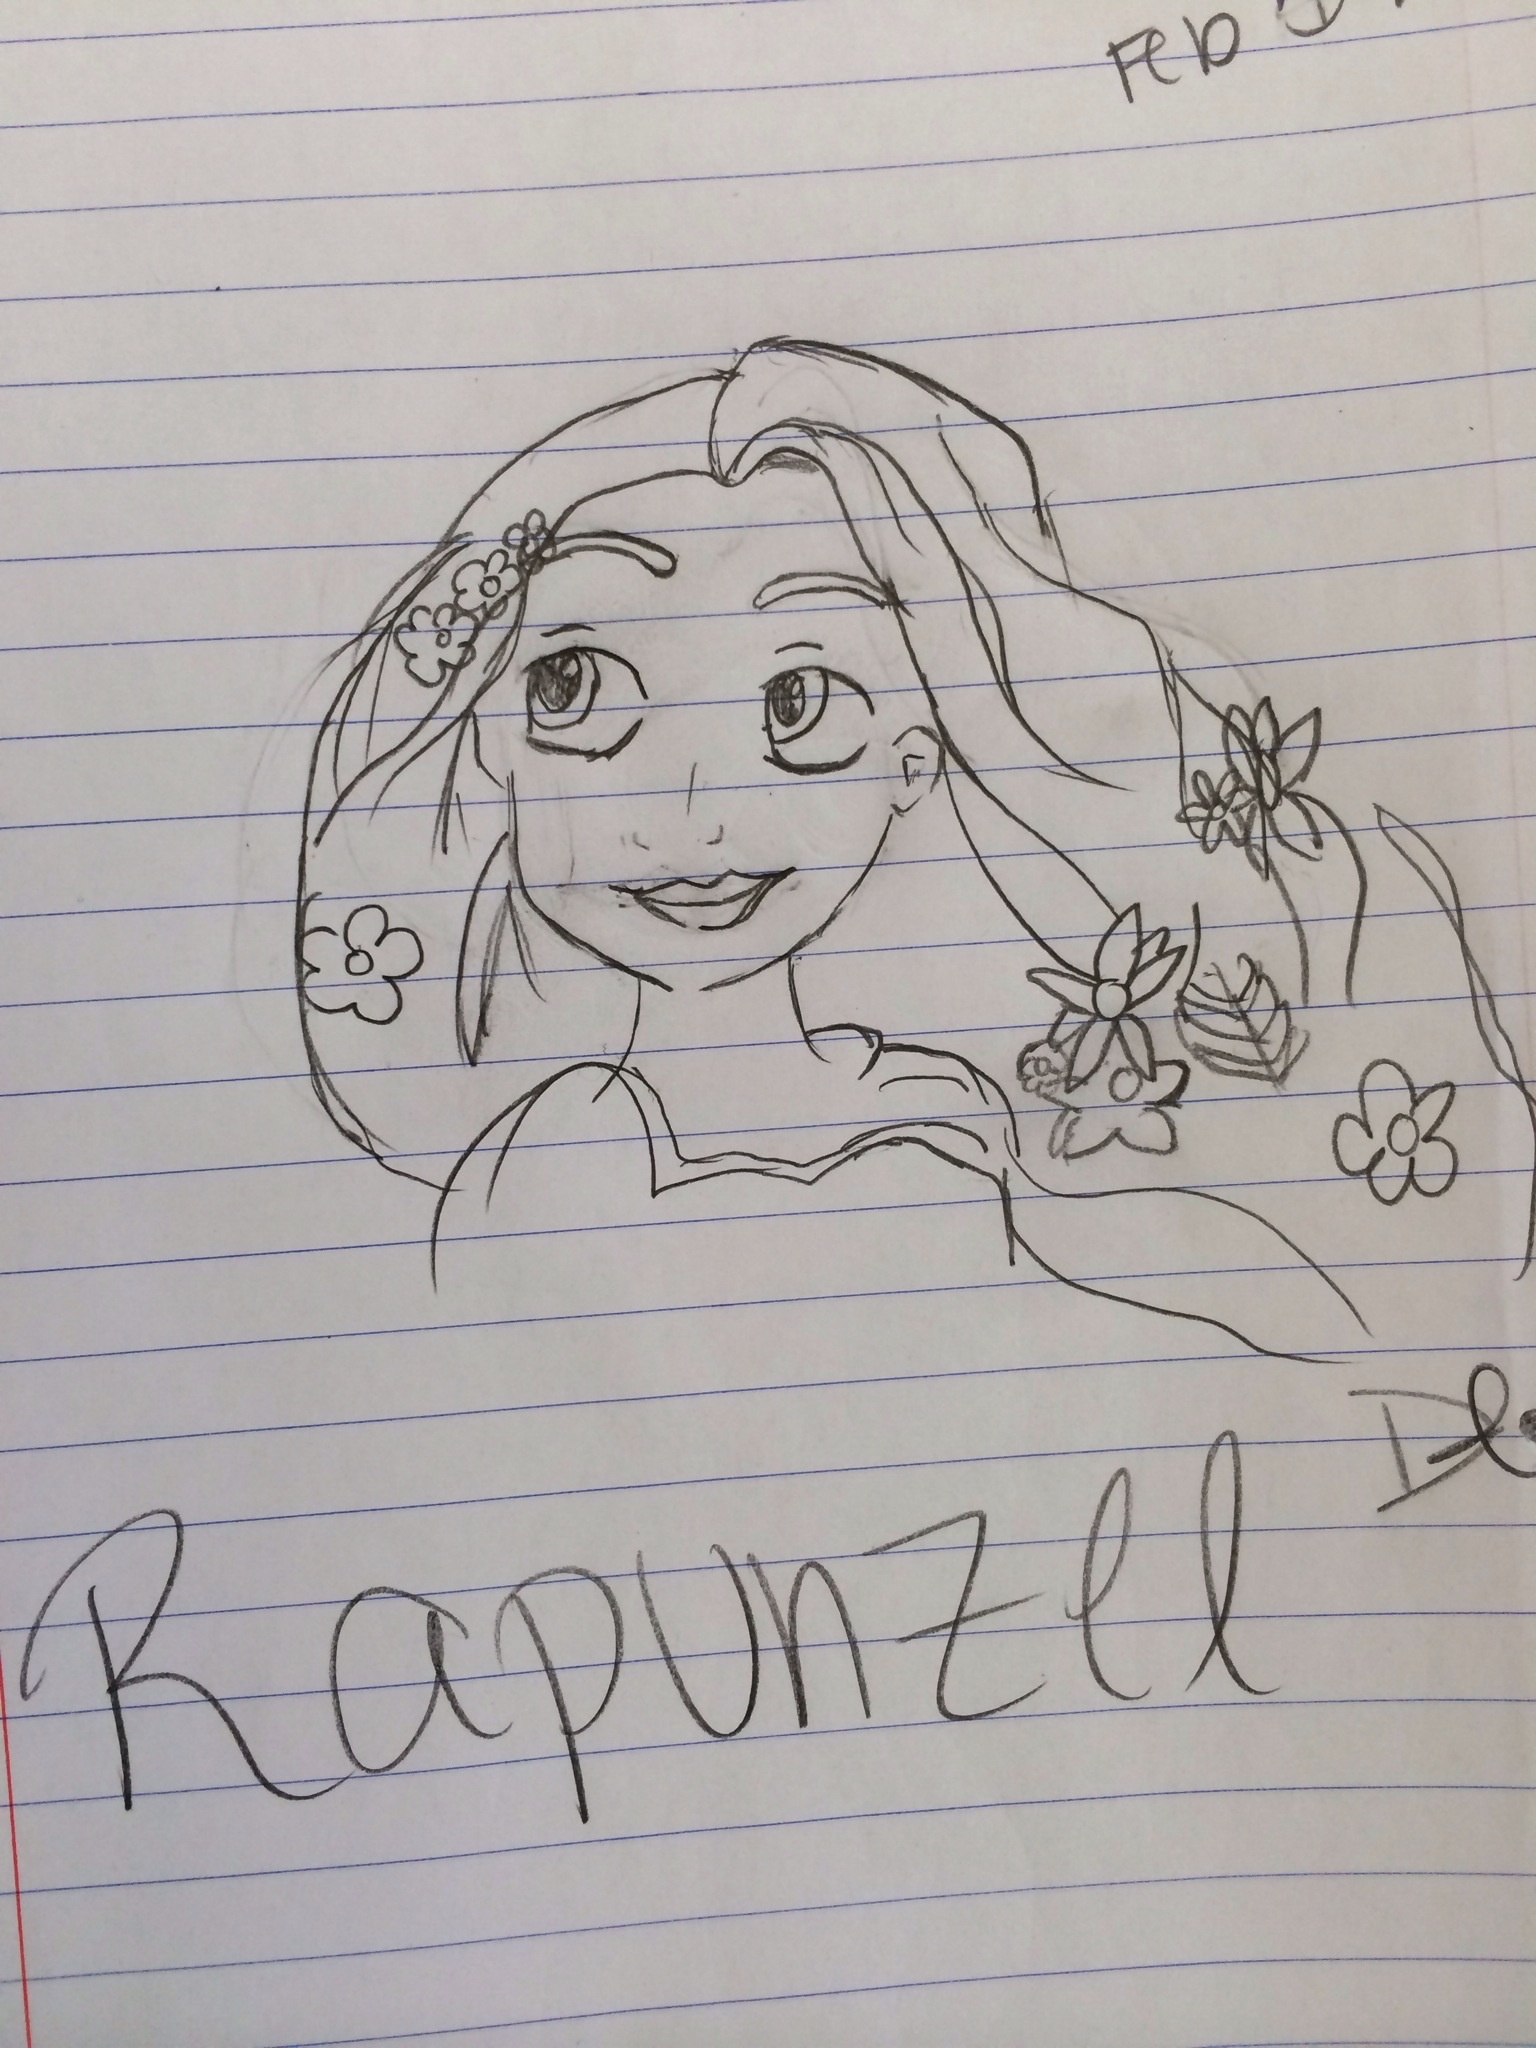 Rapunzel And Pascal  Pencil Sketch by guyx23 on DeviantArt